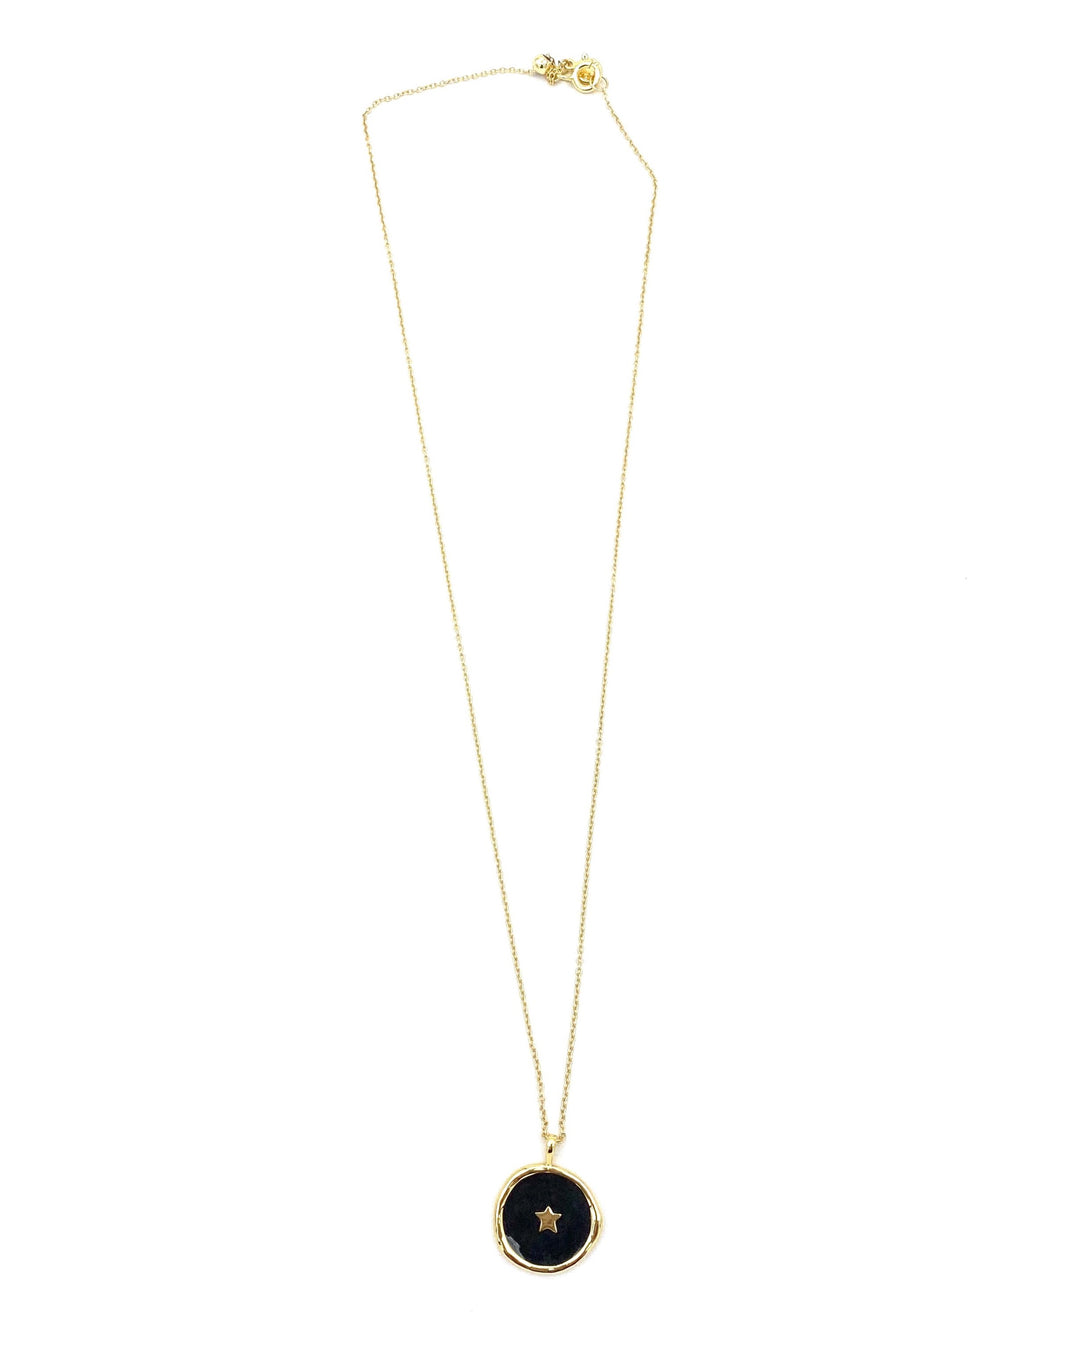 Gold Necklace With Black Pendant And Gold Star